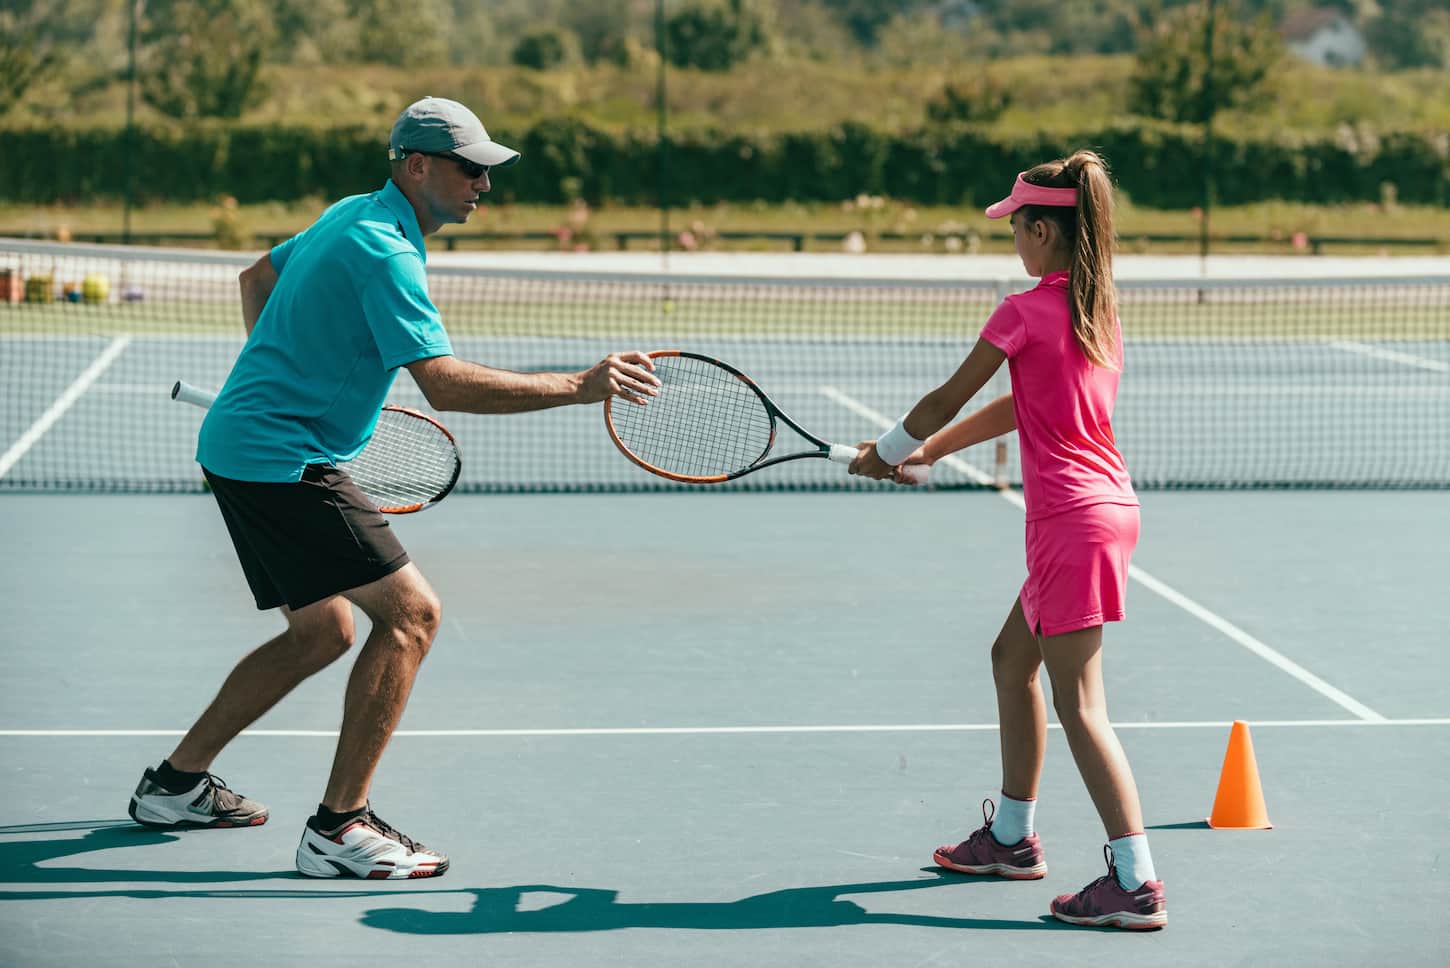 An image of a Tennis instructor with a young girl on tennis training.